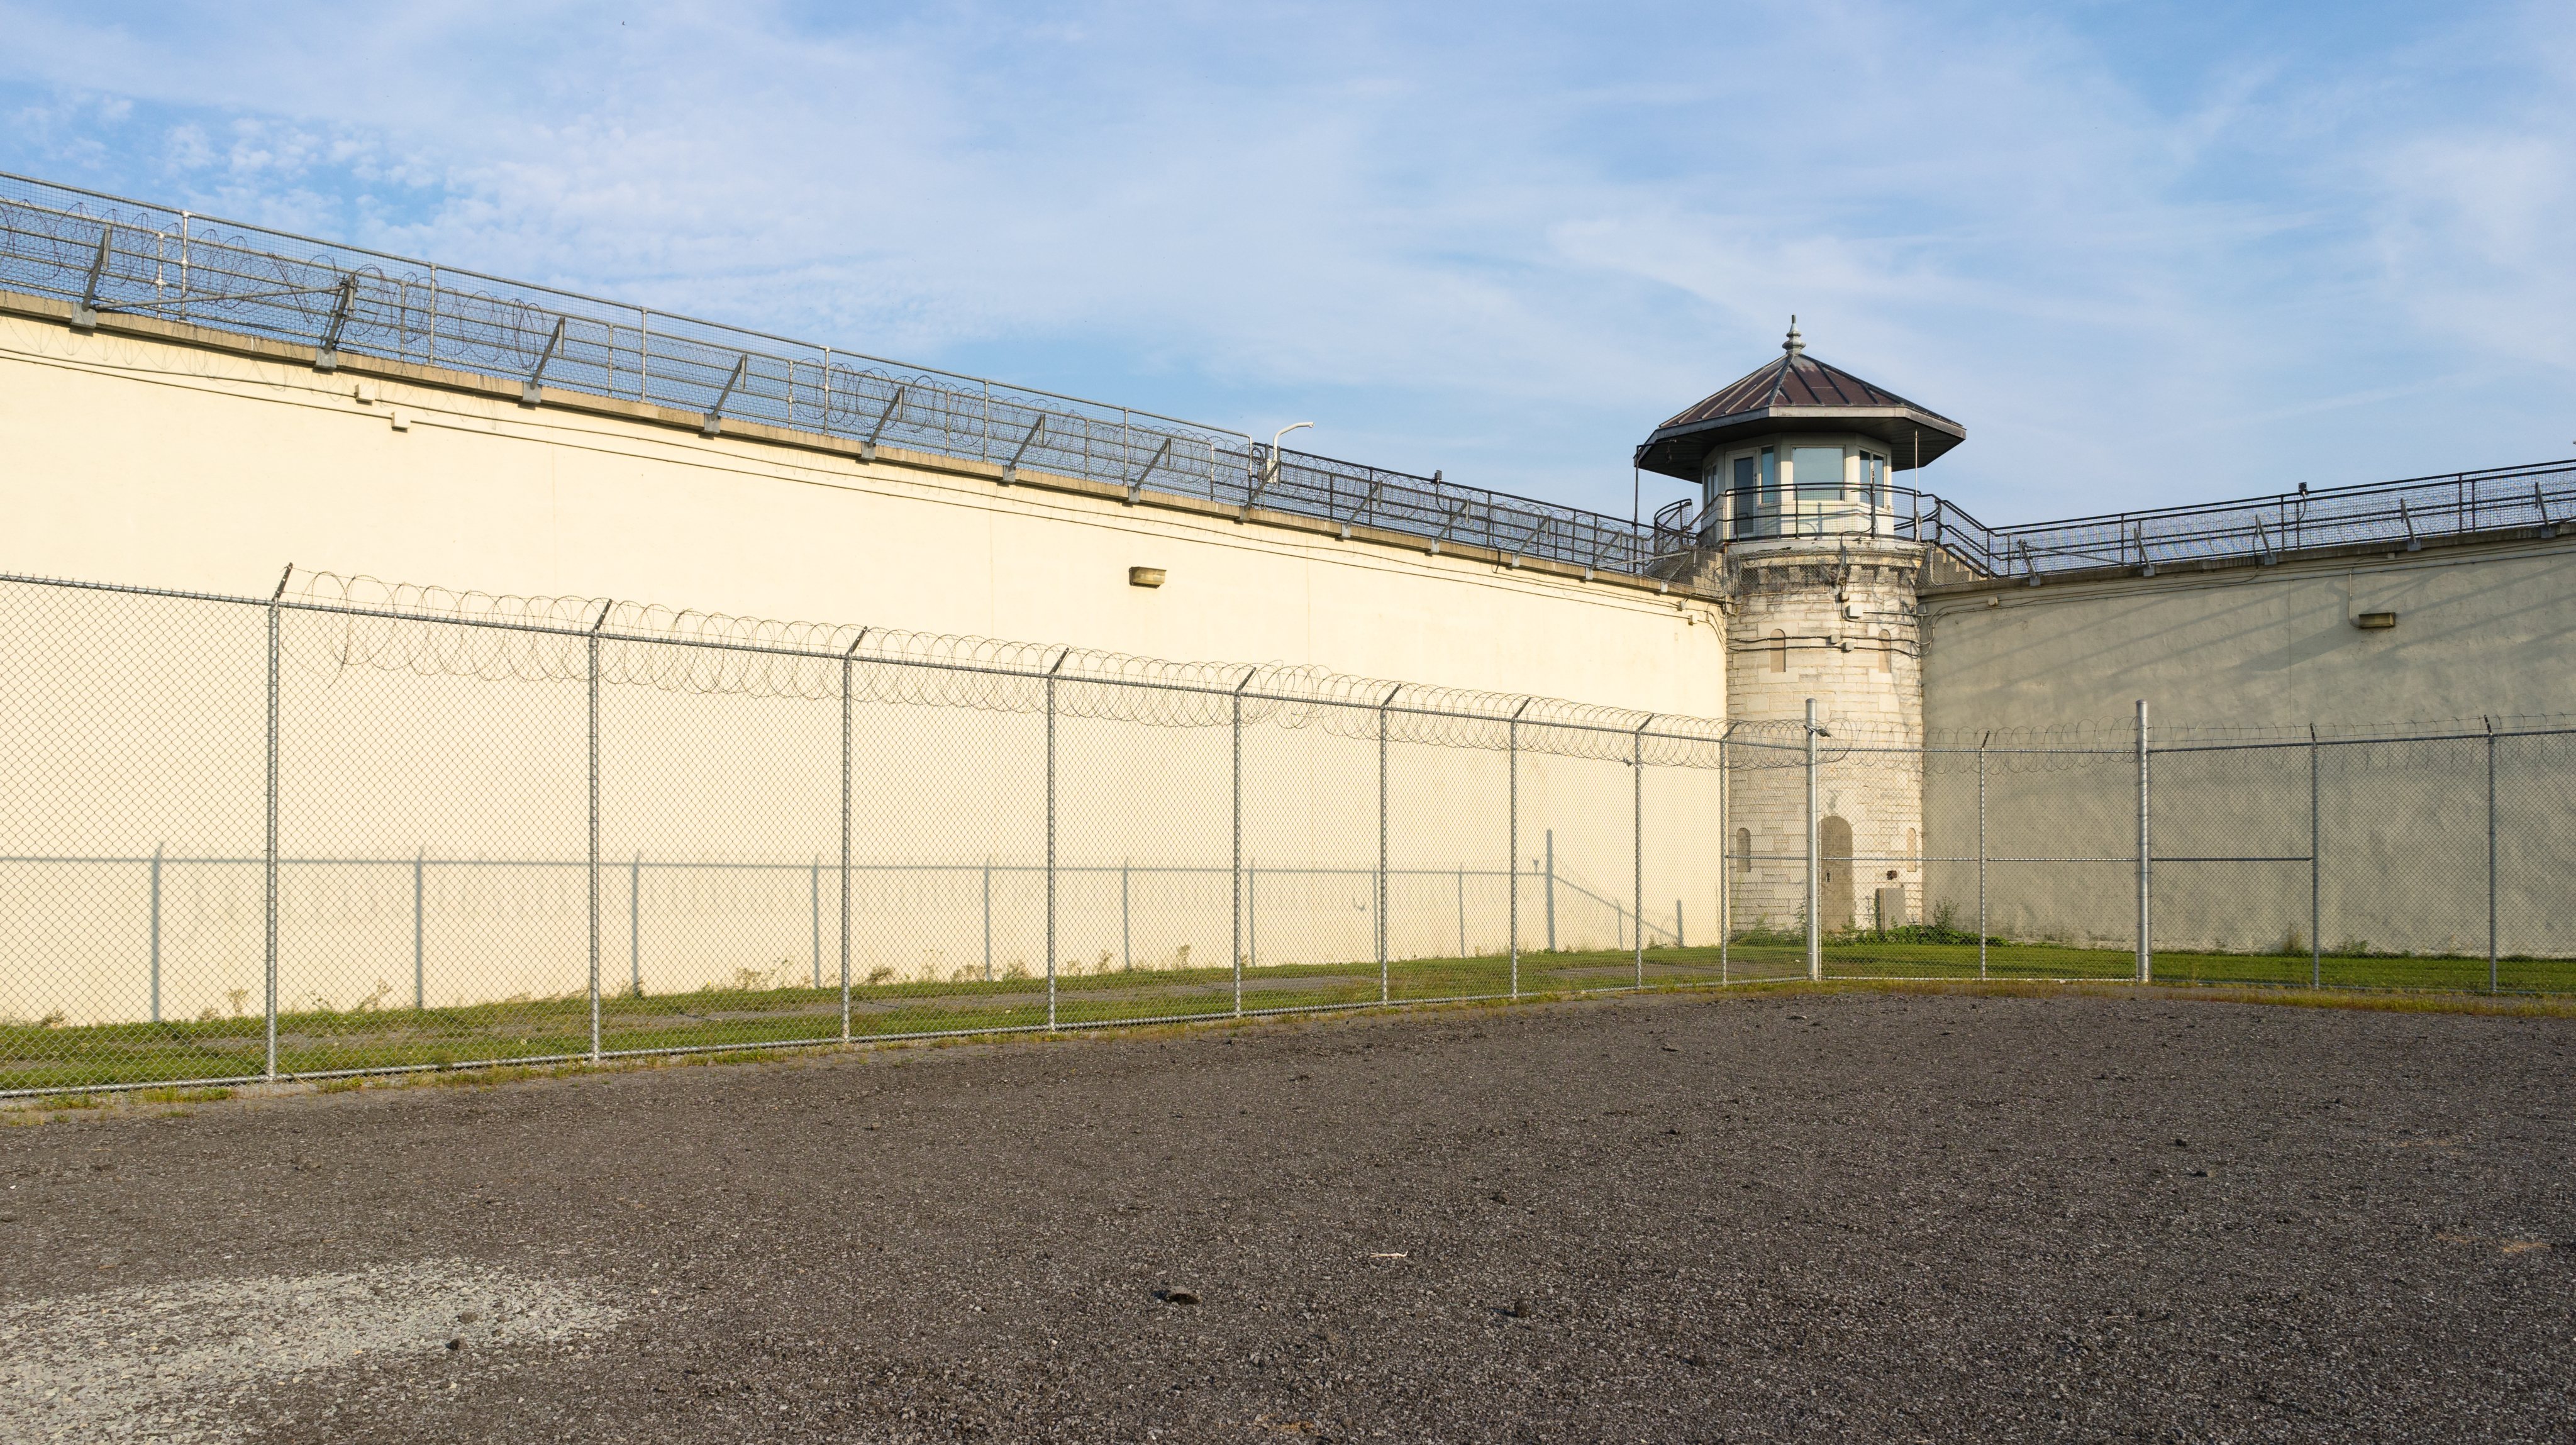 The exercise yard of a decommissioned prison